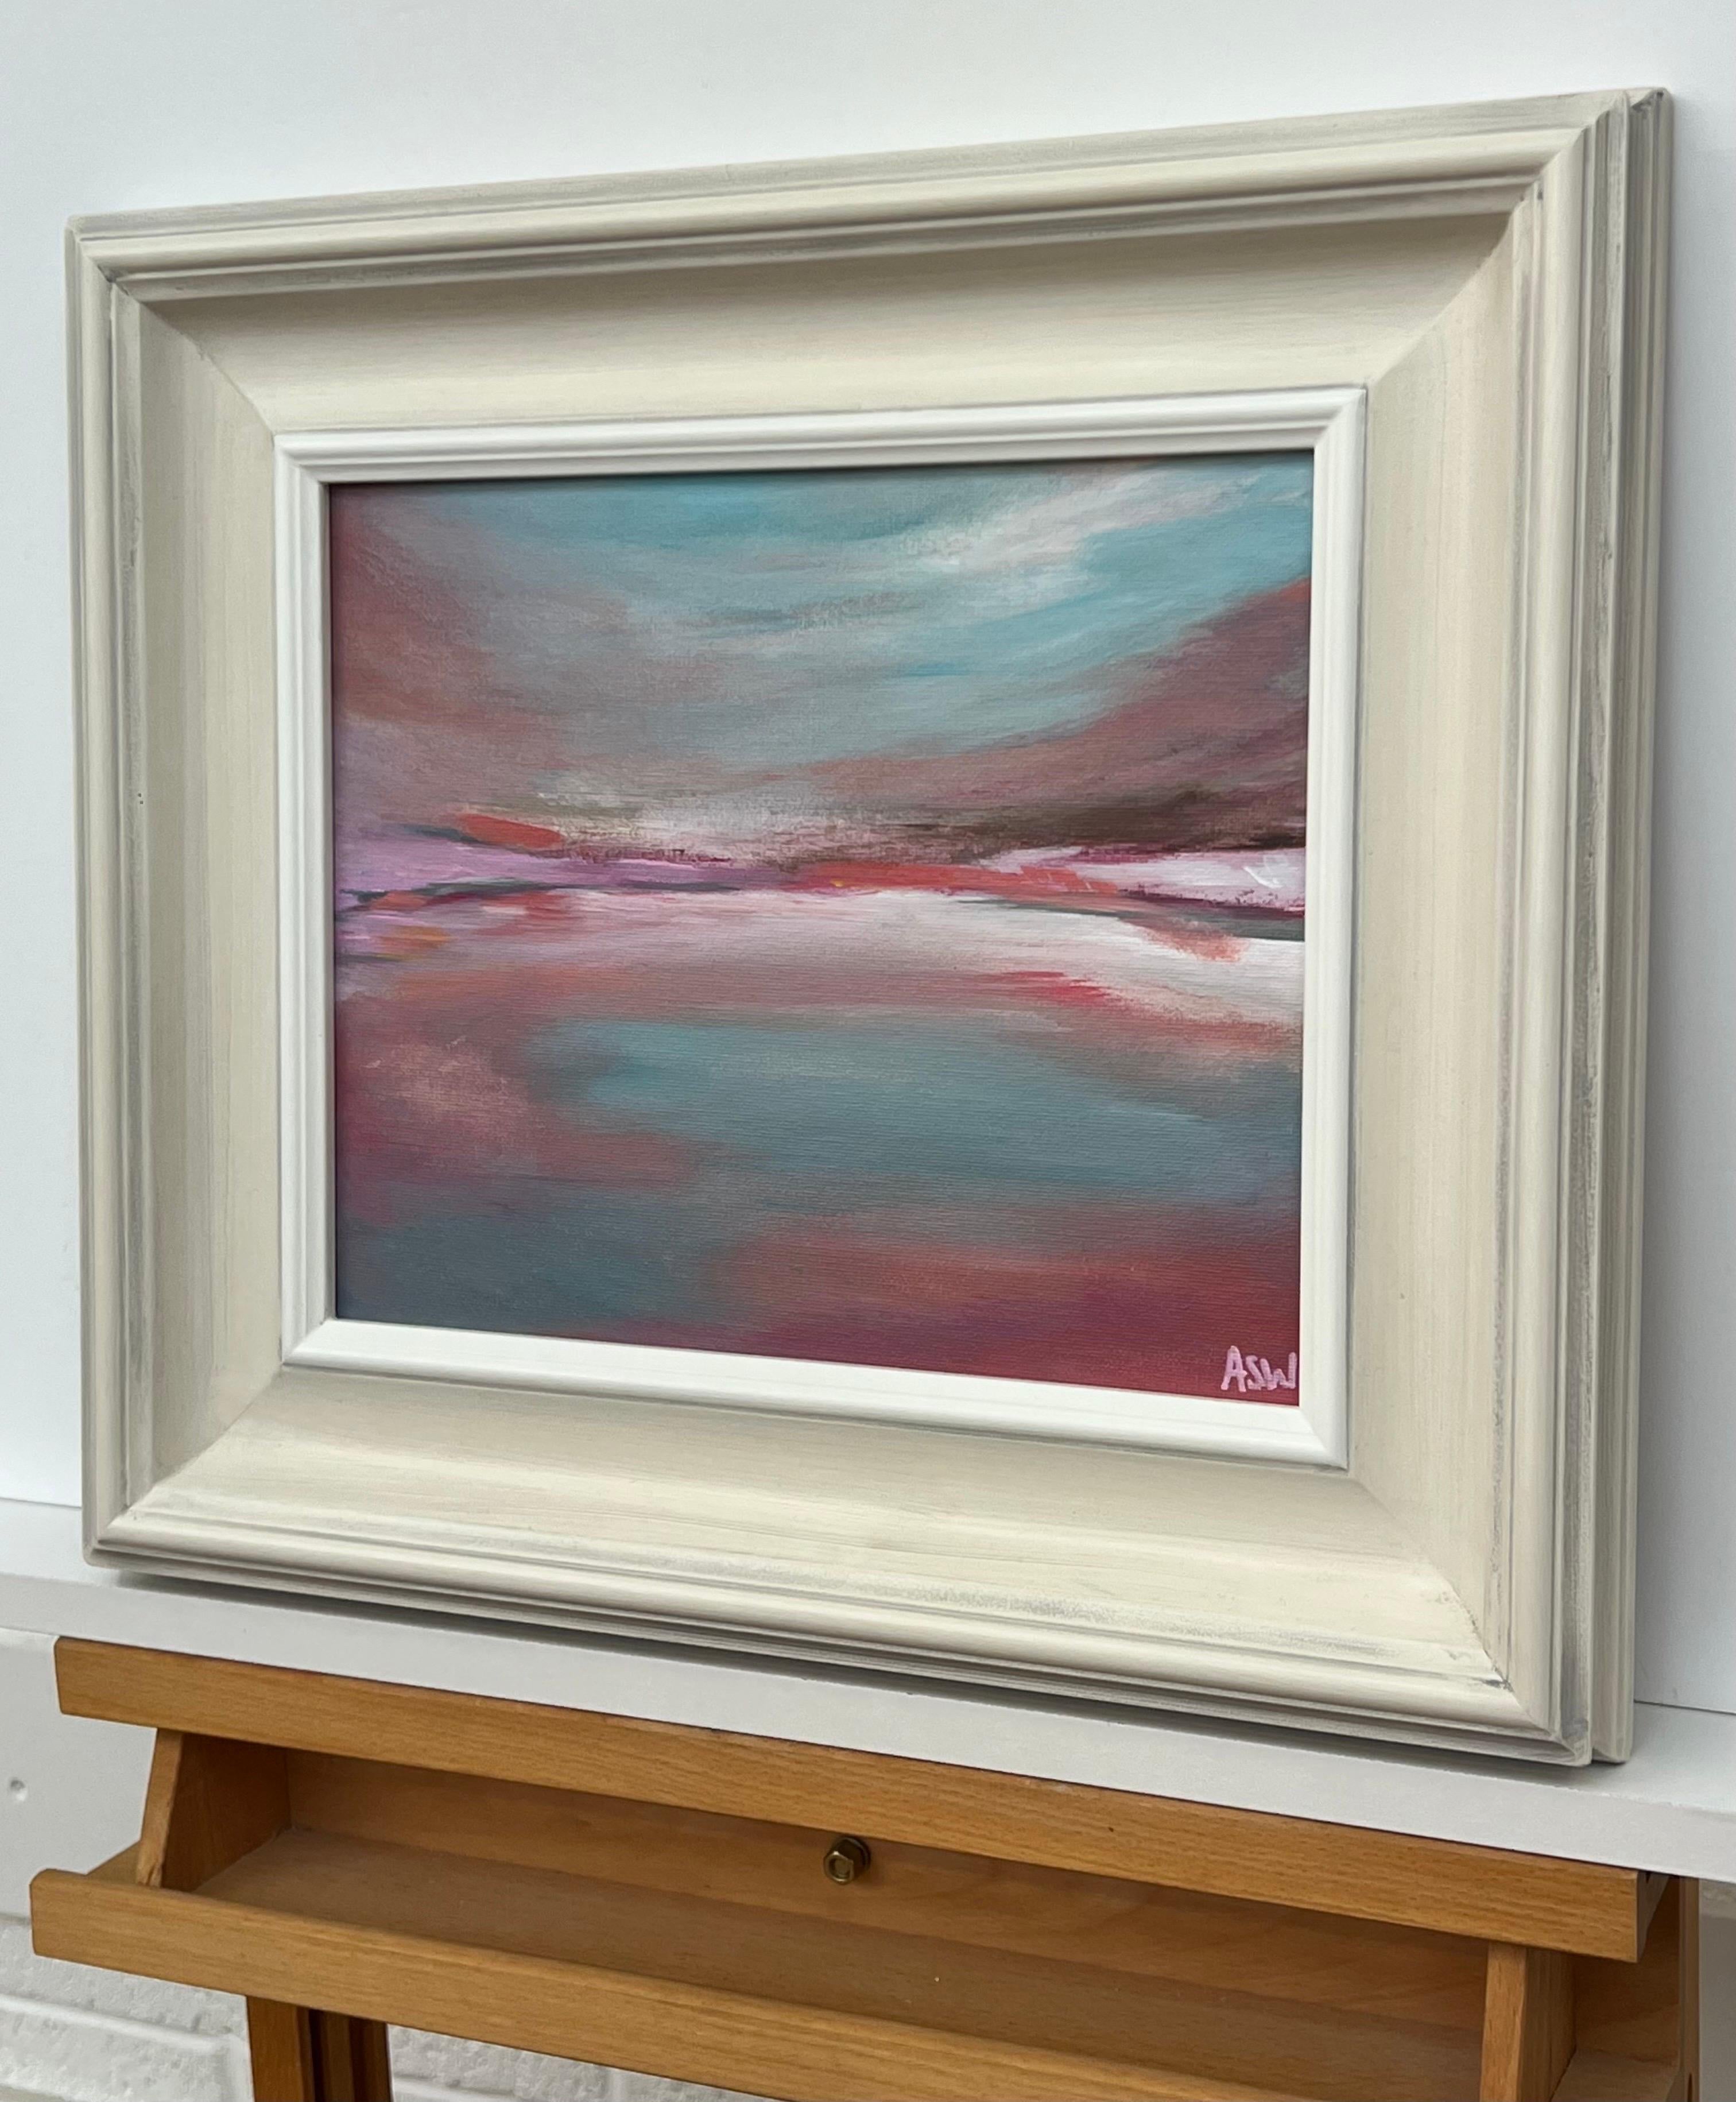 Serene and Dreamy Abstract Landscape using Pink Purple & Blue by Contemporary British Artist, Angela Wakefield. 

Art measures 12 x 10 inches
Frame measure 18 x 16 inches

This framed abstract painting features a blend of vibrant and soft hues. The